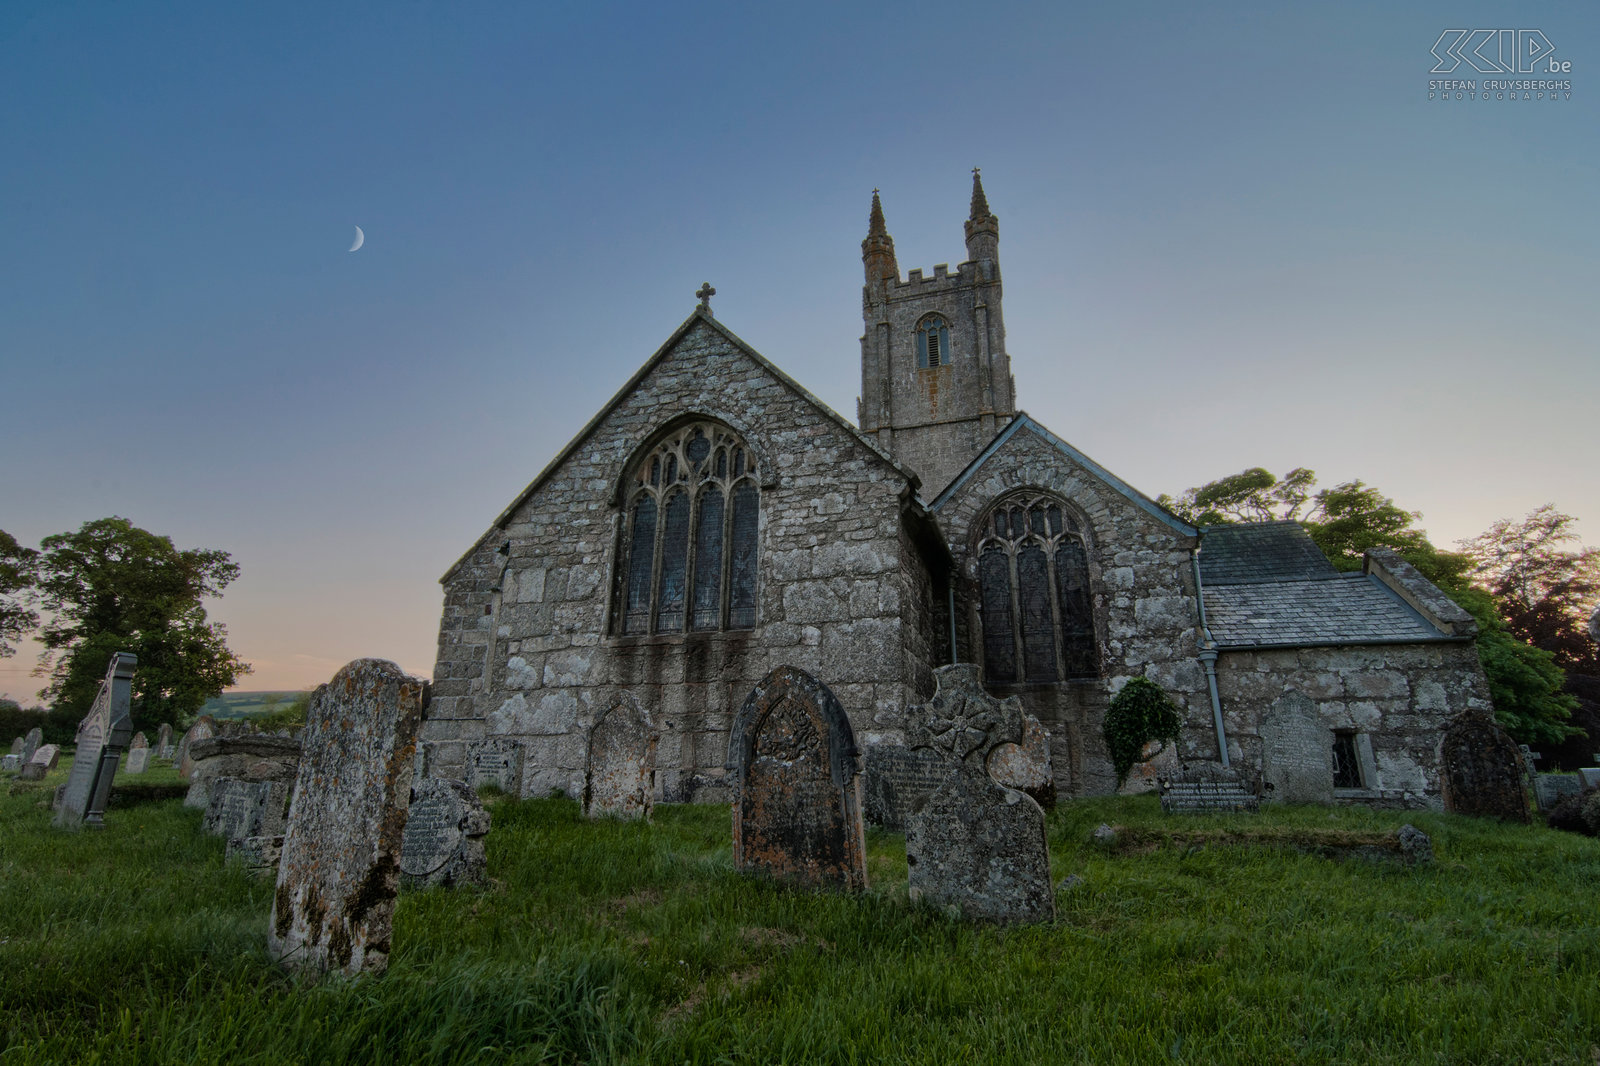 Church of Widecombe-in-the-Moor The old church of Widecombe-in-the-Moor after sunset. Widecombe-in-the-Moor is a small village in the national park of Dartmoor (Devon). Stefan Cruysberghs